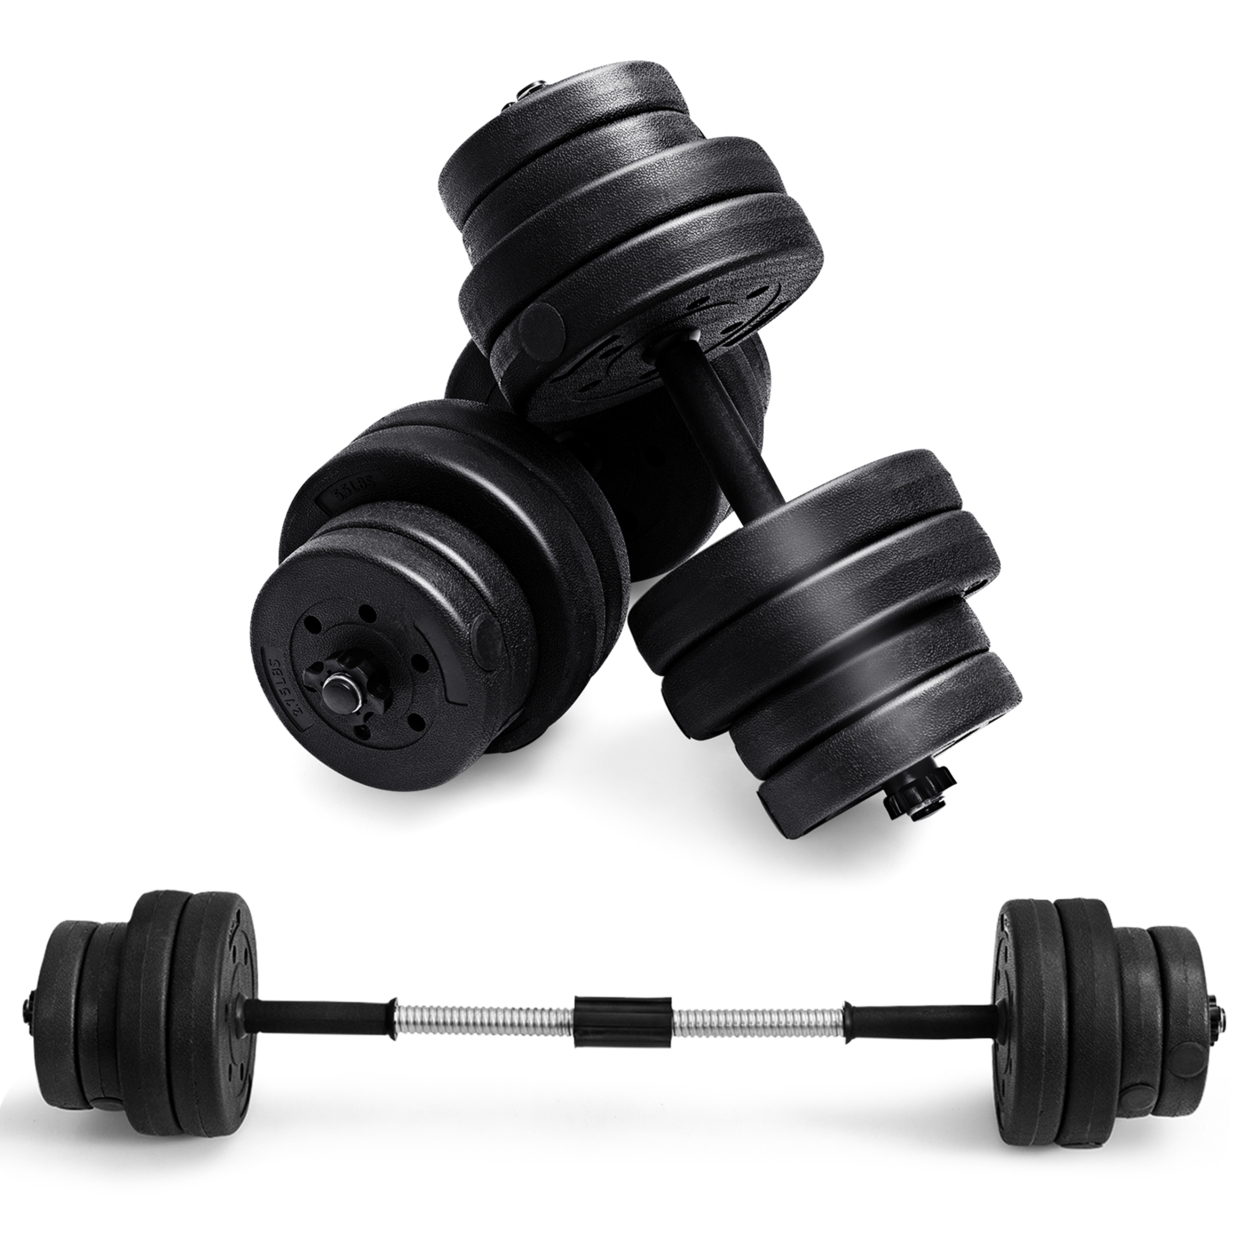 66Lbs 2 In 1 Adjustable Dumbbell Set Strength Training Set Home Gym Exercise